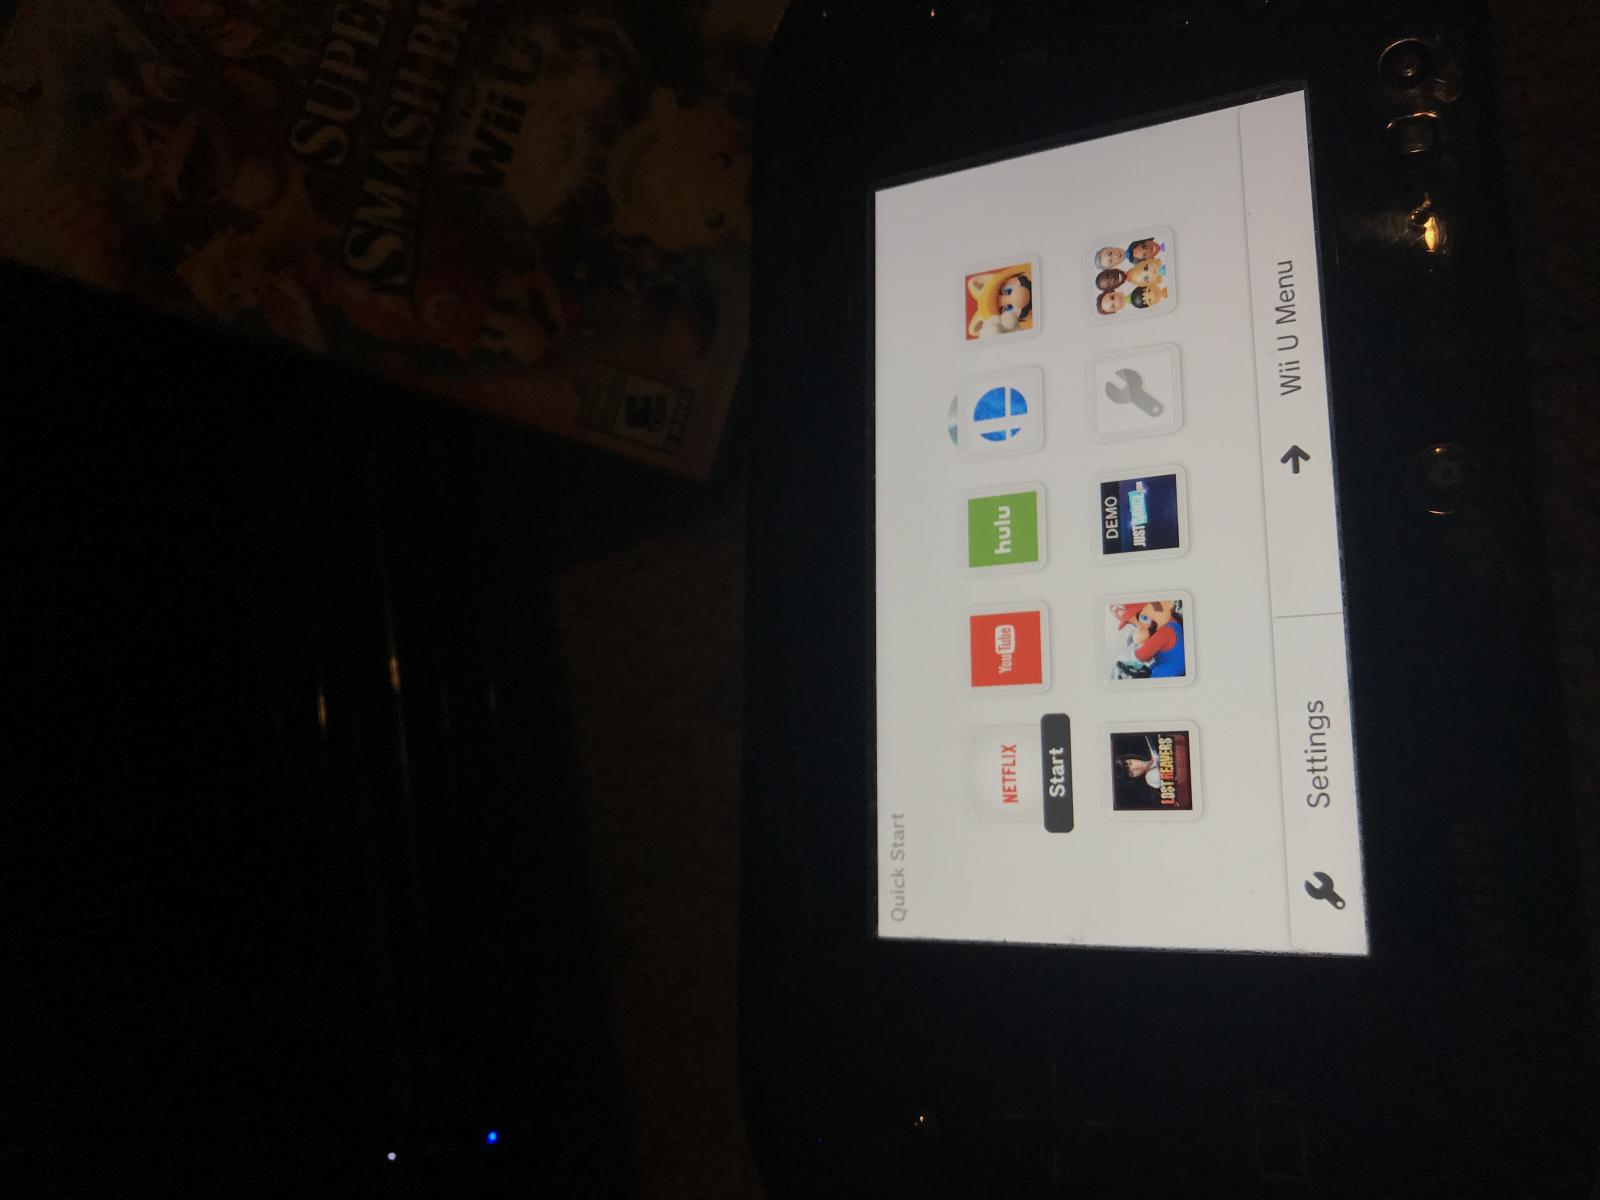 For sale Wii U 32 gb with Super Smash Bros